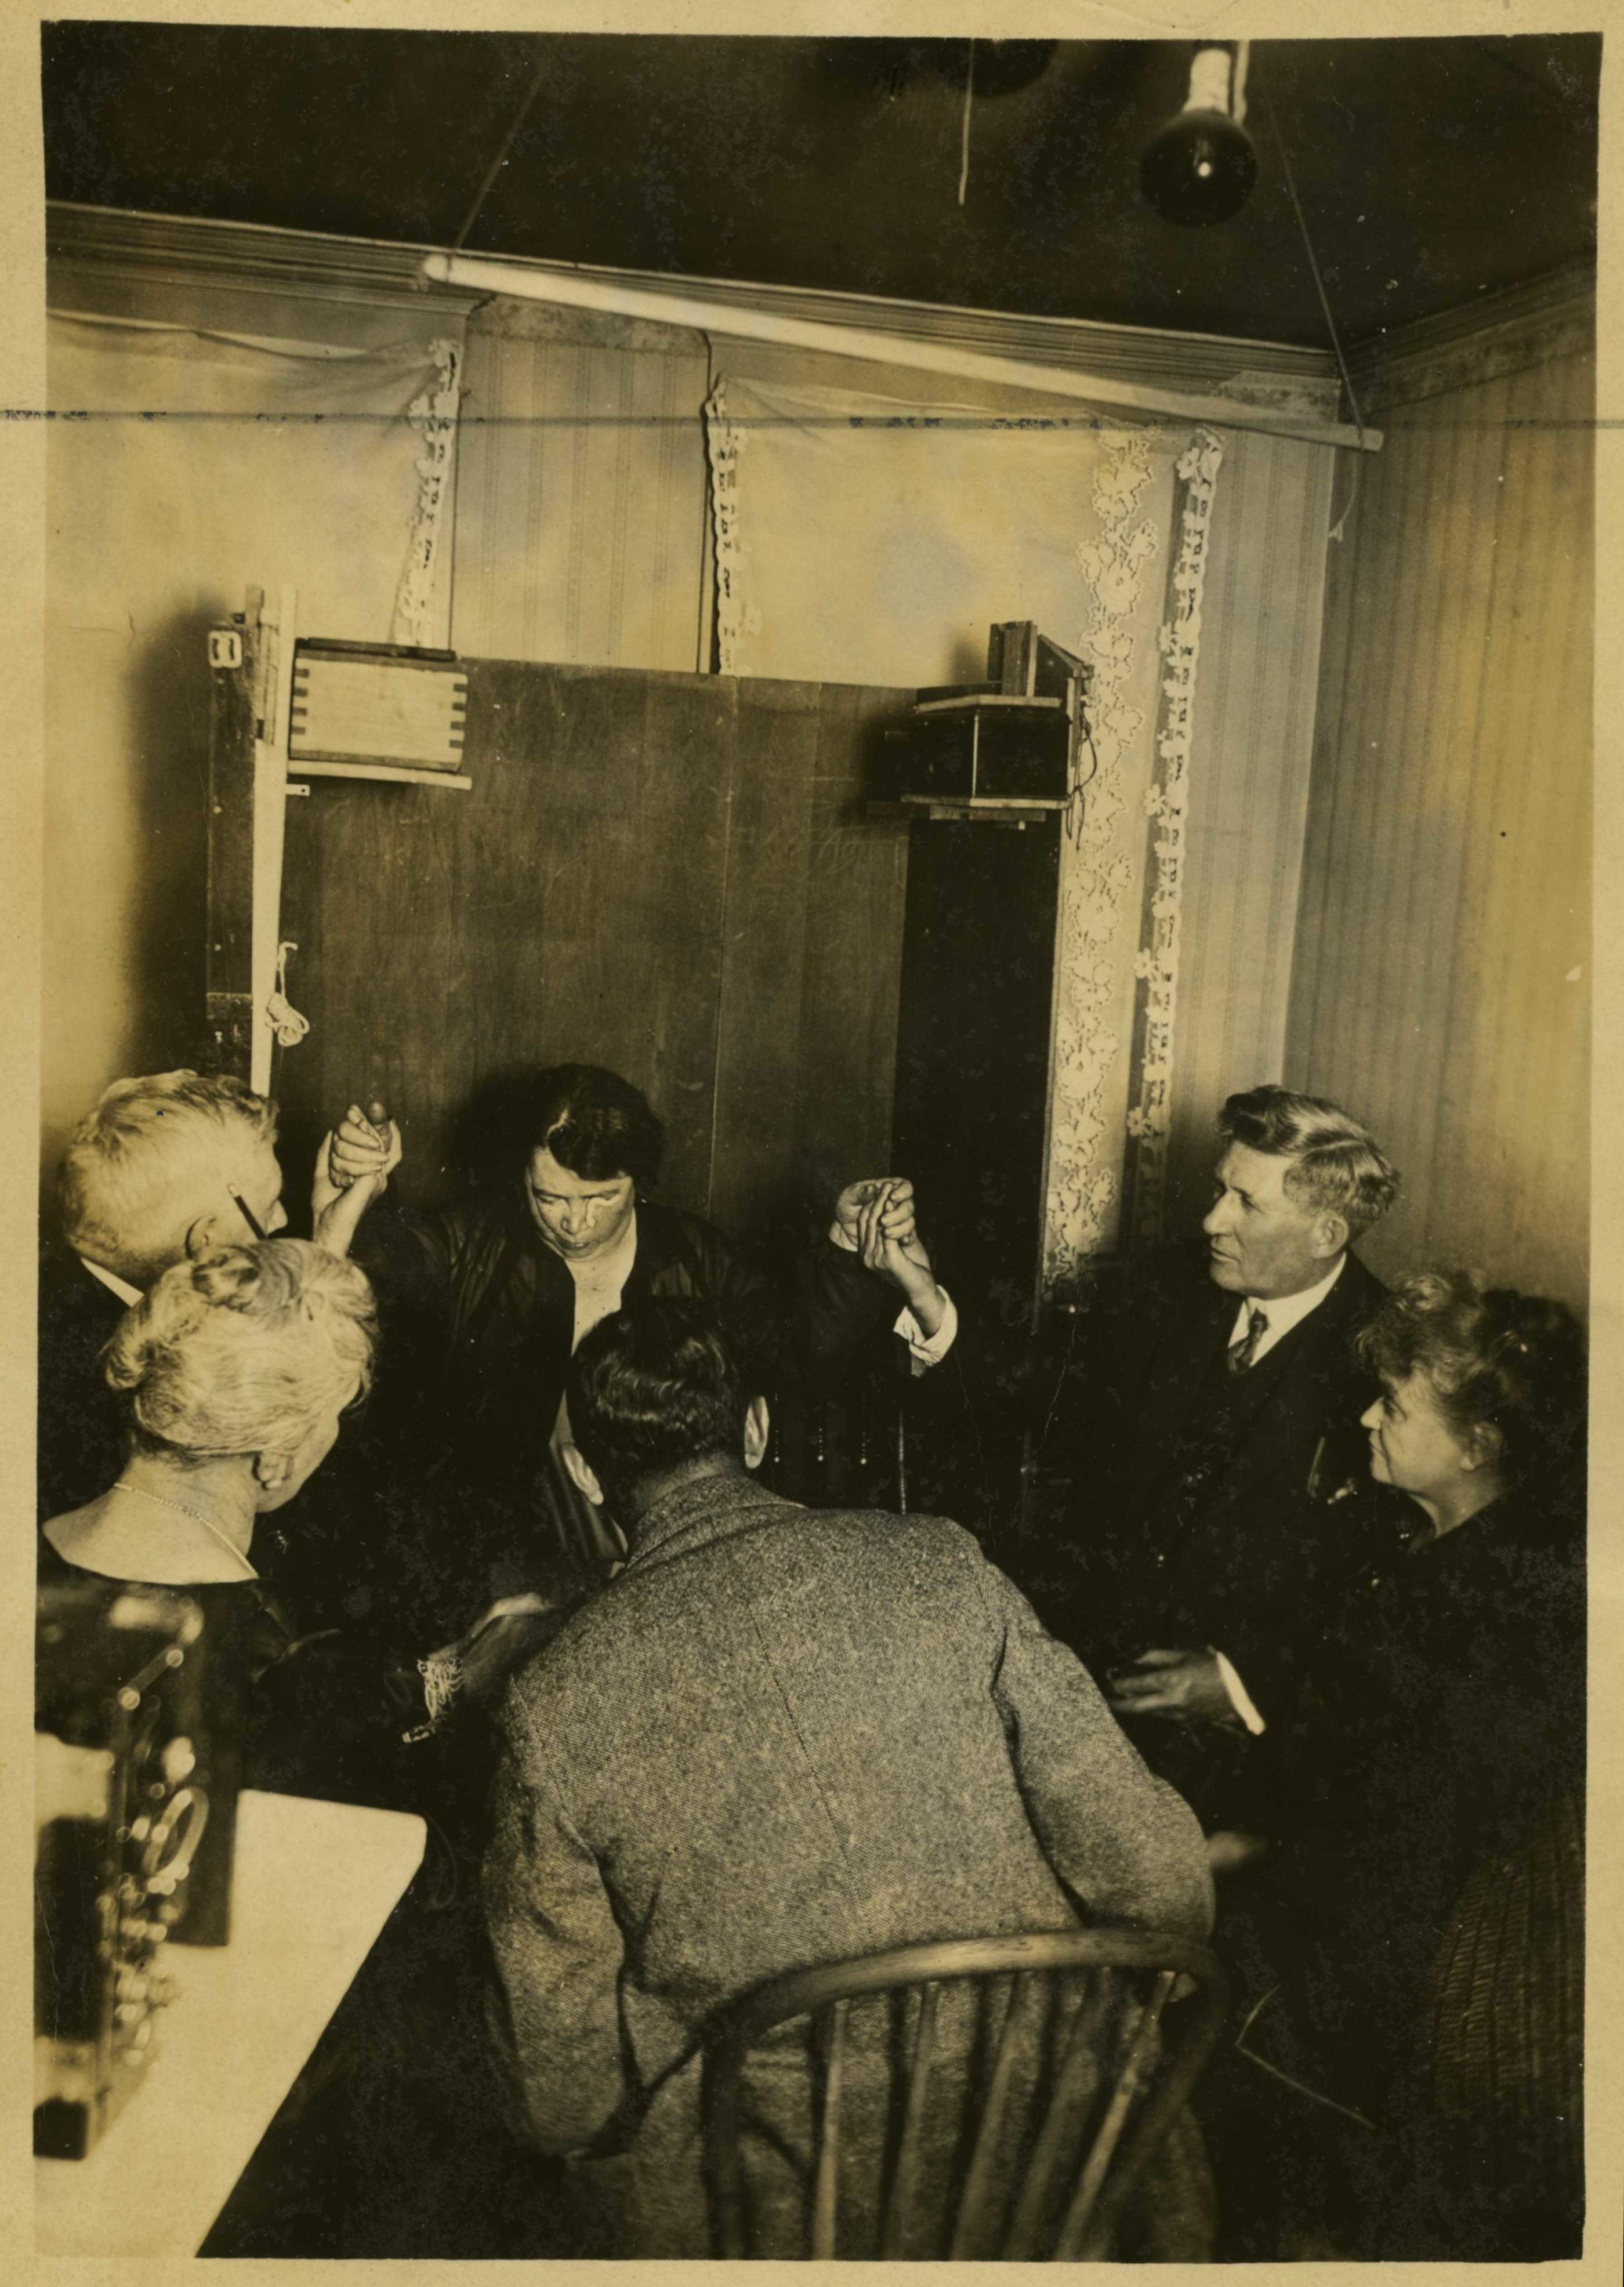 A wide angle photograph taken during a seance at Hamilton House, September 23, 1928.